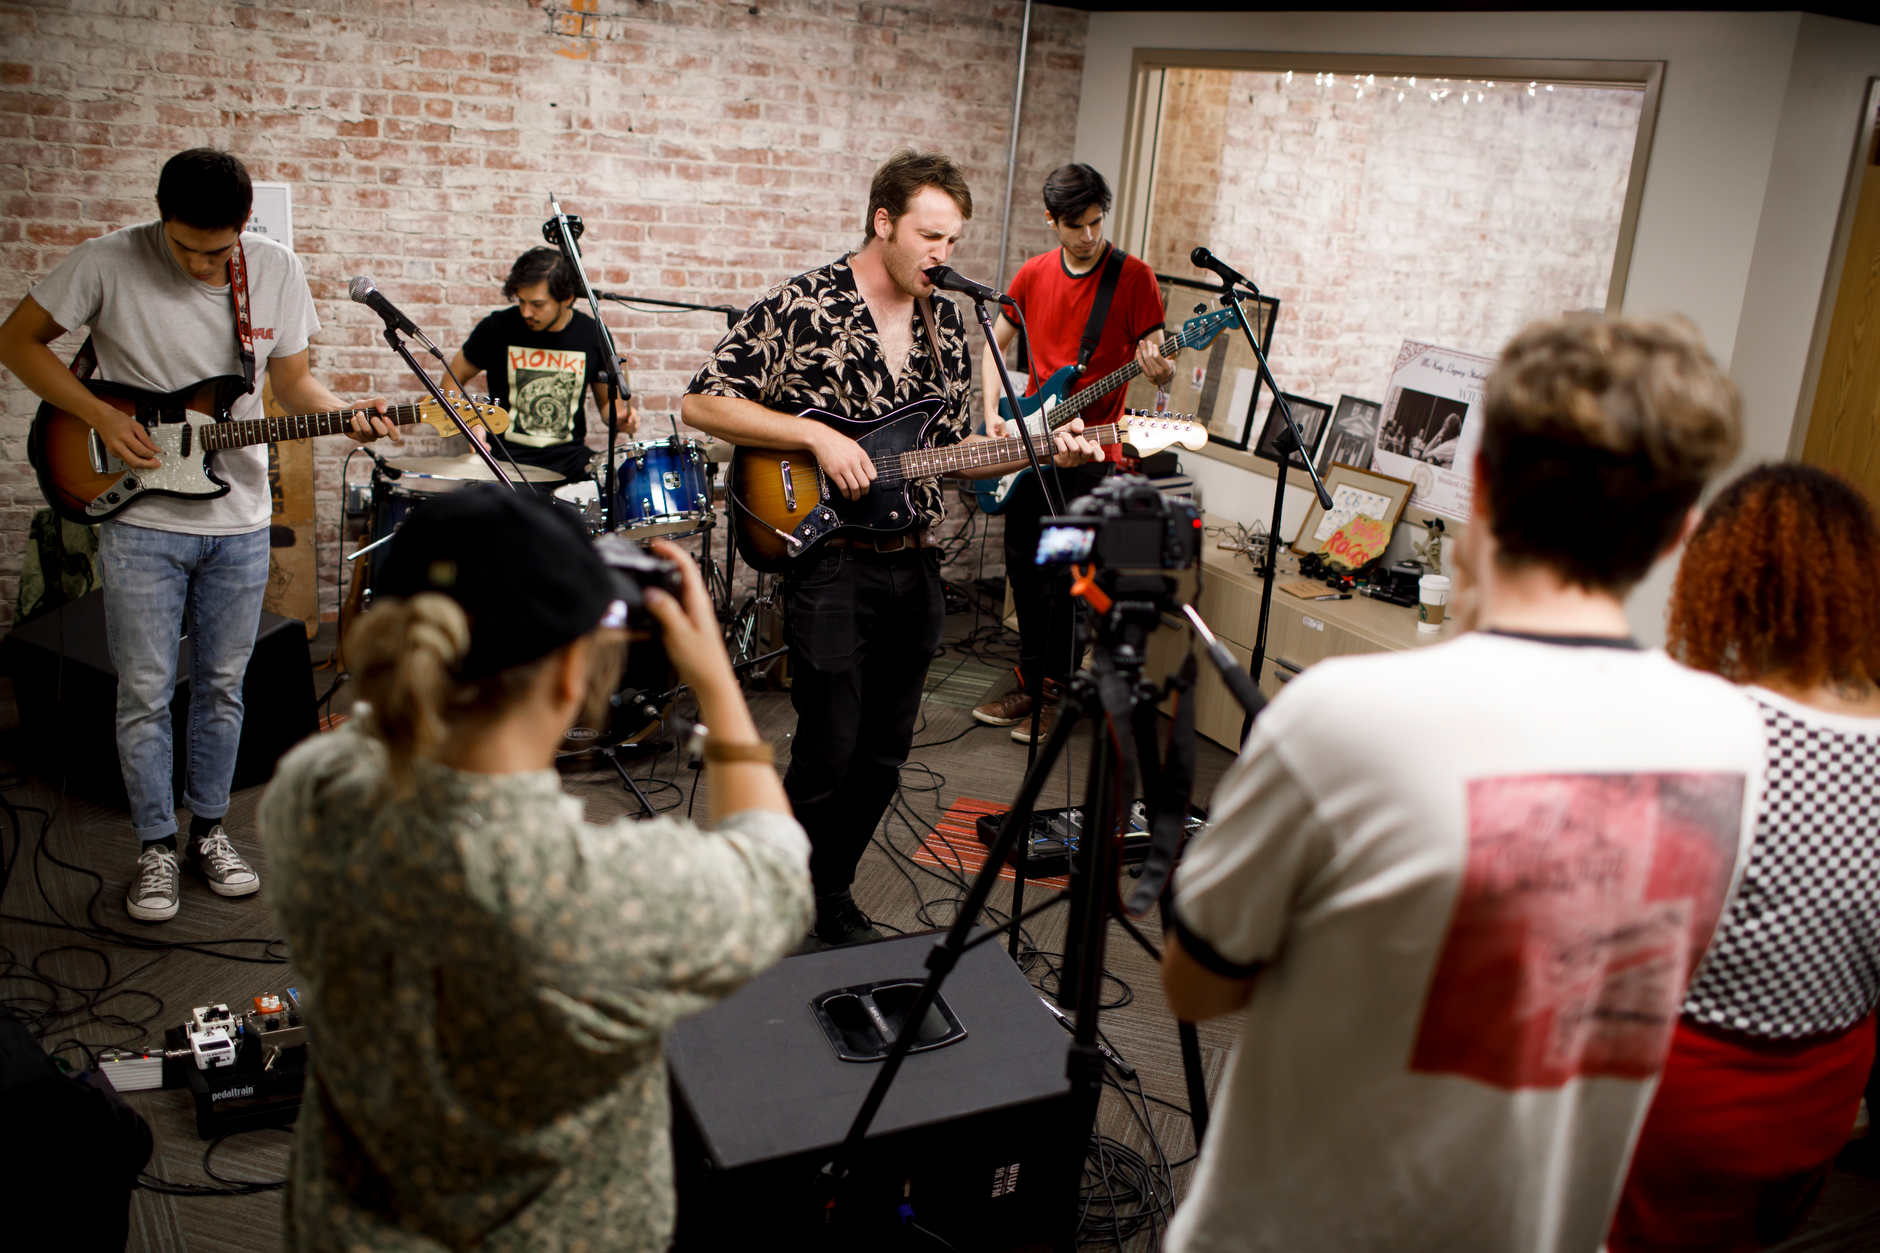 Birdgangs, an alternative band from Boston, performs in the WIUX studios in Franklin Hall on Tuesday, Sept. 25, 2018.